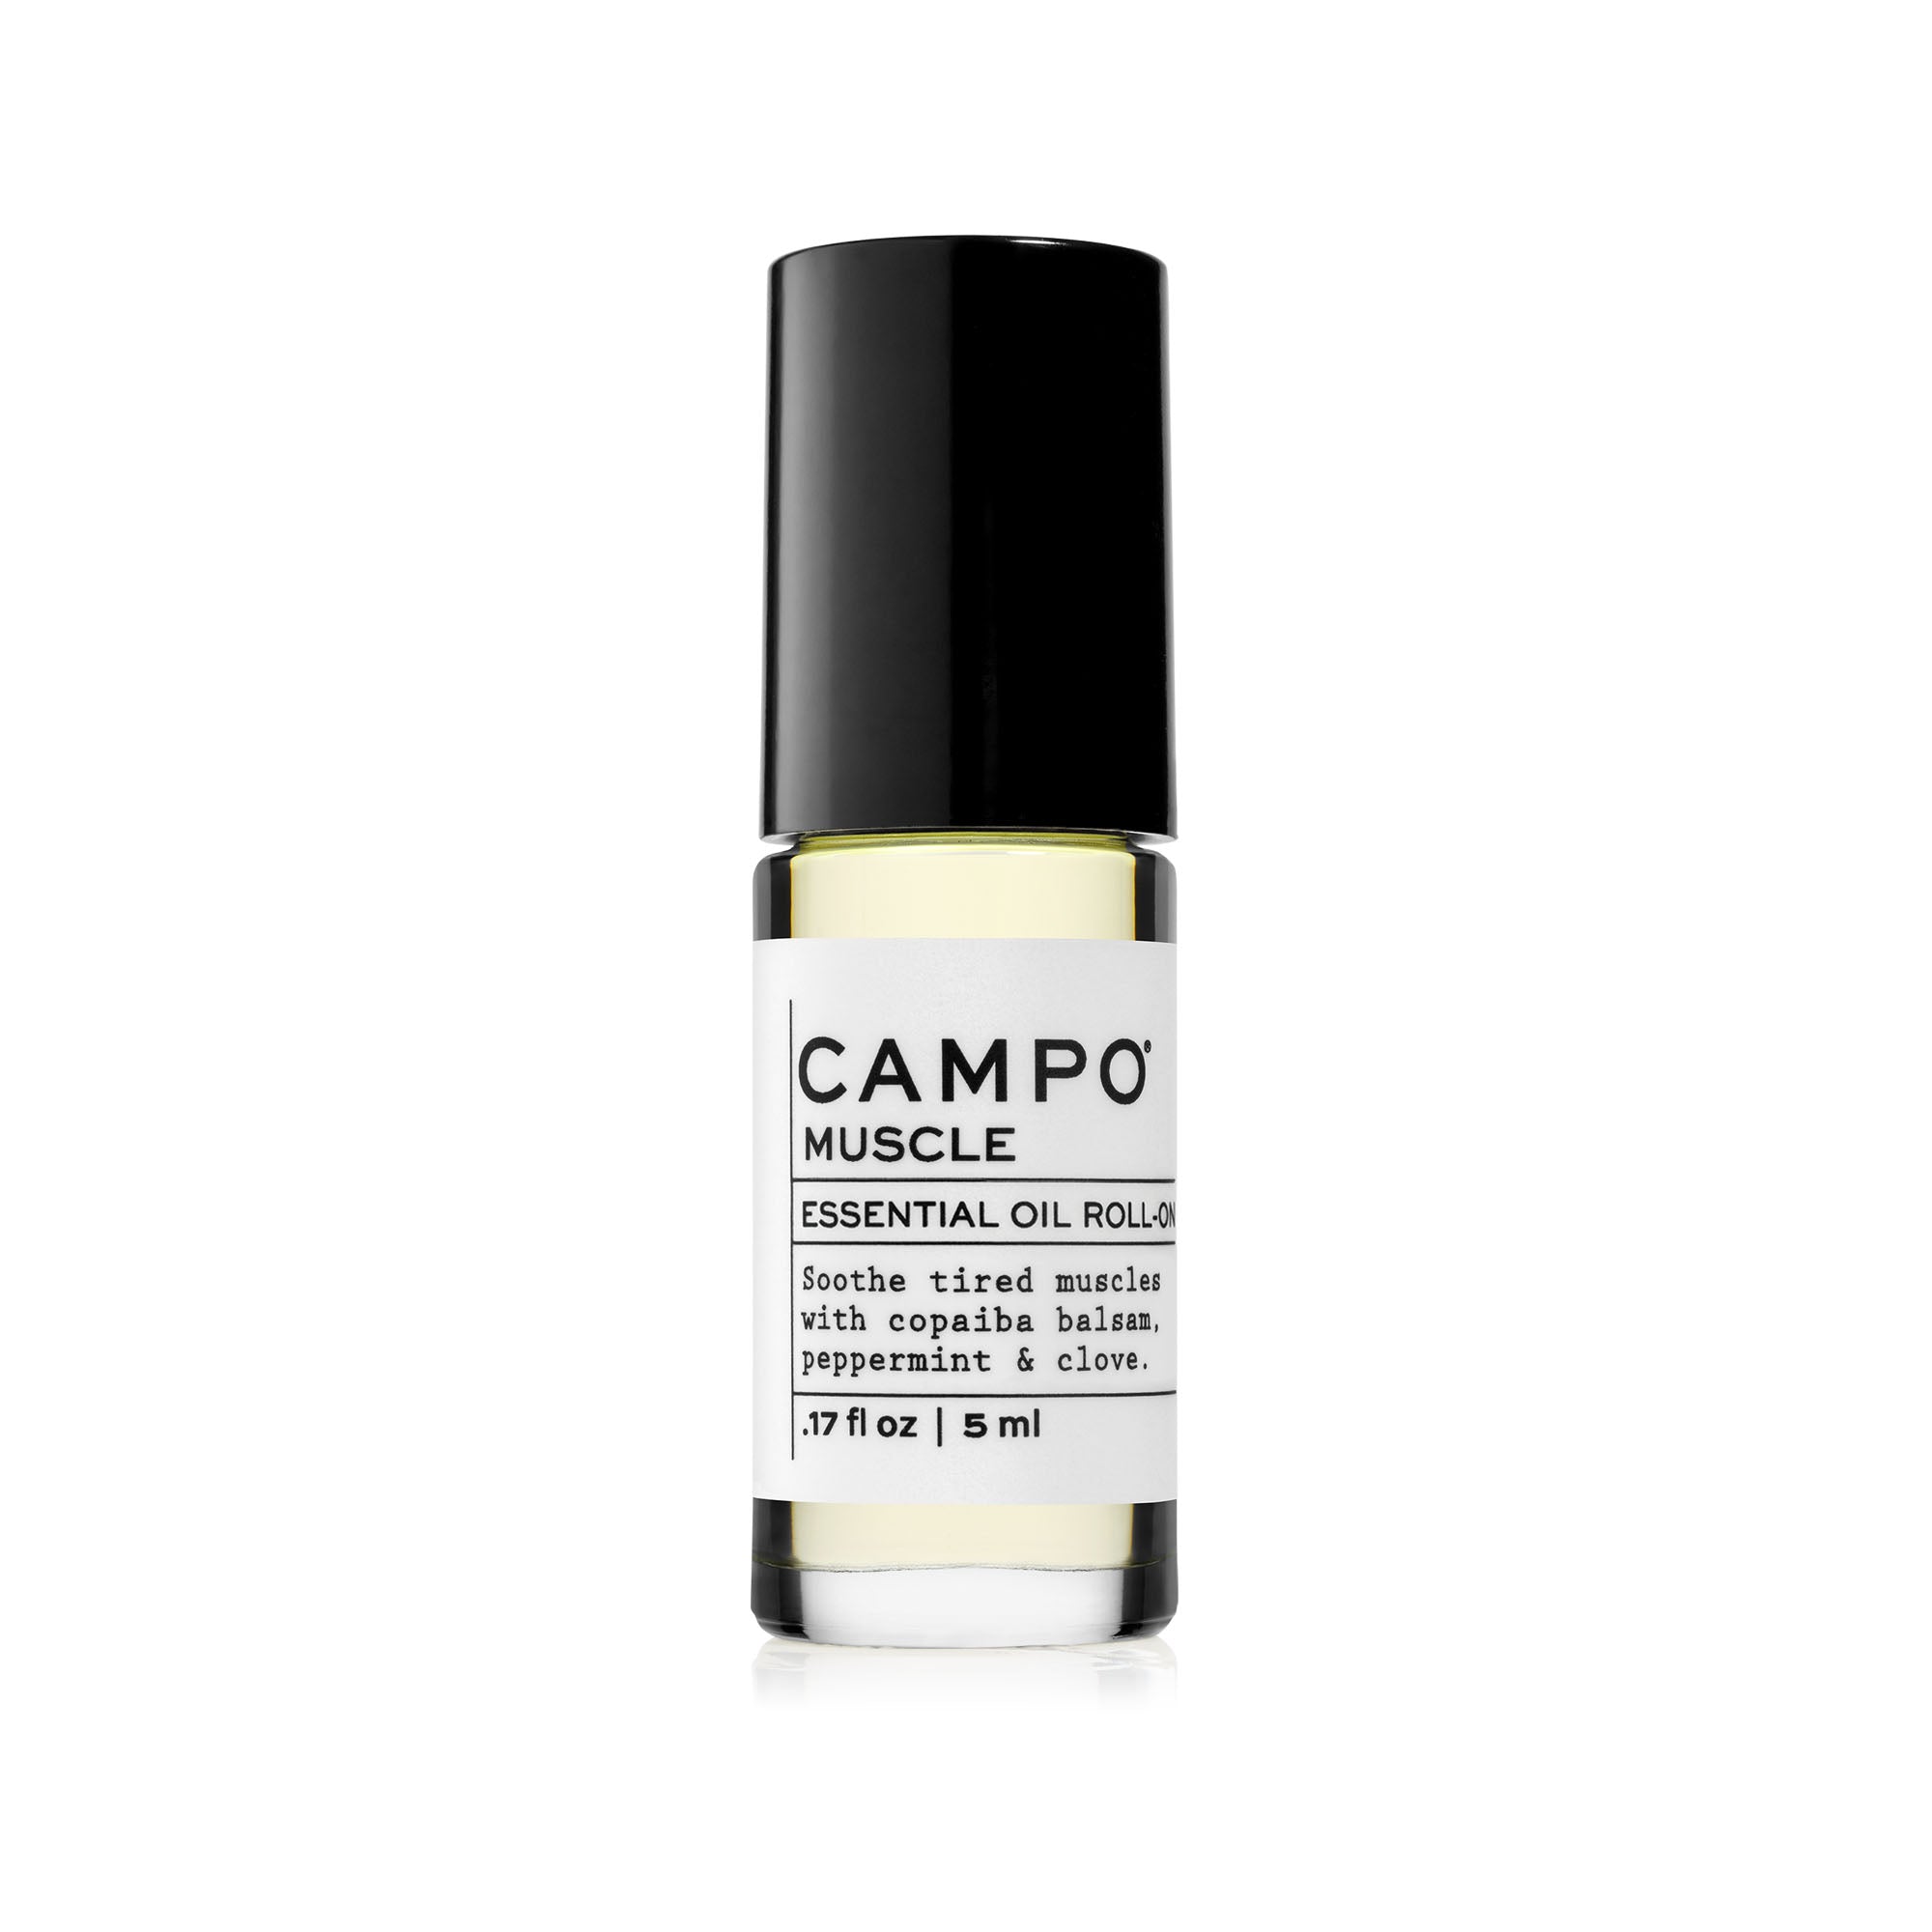 Campo Beauty Essential Oil MUSCLE Stretch Mark Relief Blend Roll-On that in 5 ml. Soothe sore muscles and pain. Relieve tension with this 100% natural essential oil roll-on blend of copaiba balsam, peppermint, eucalyptus & clove.